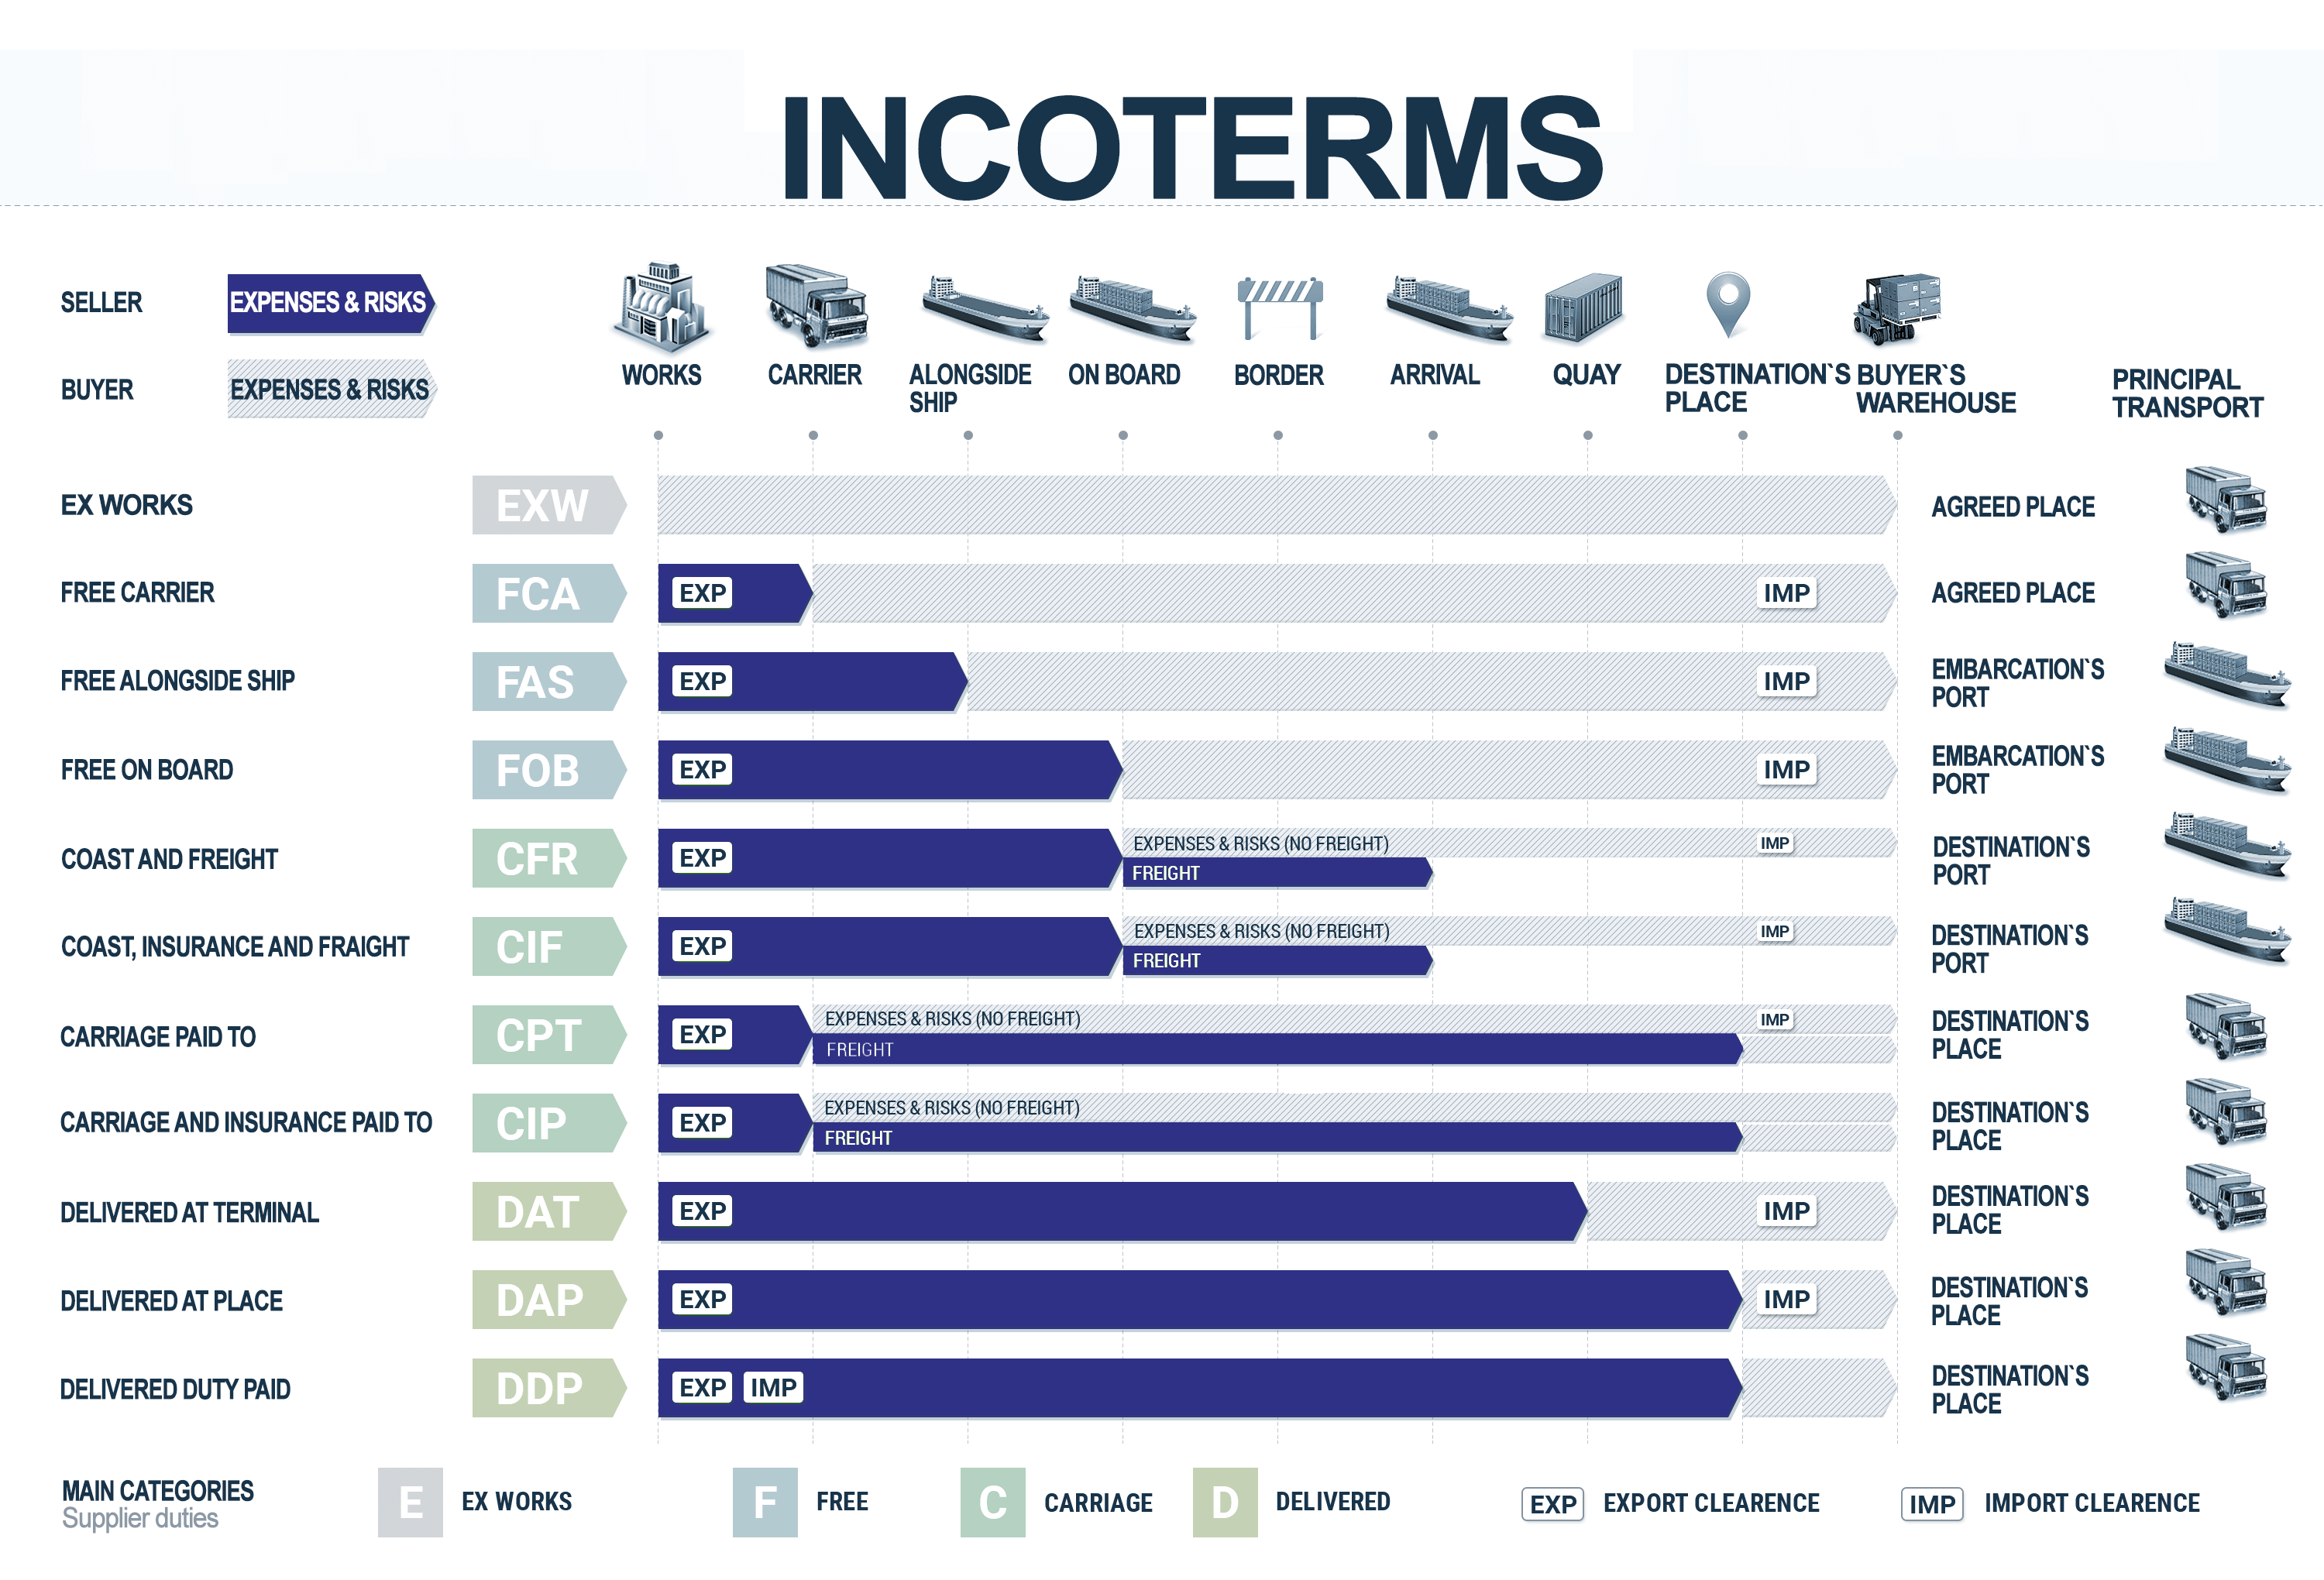 Distribution of responsibility according to INCOTERMS 2010